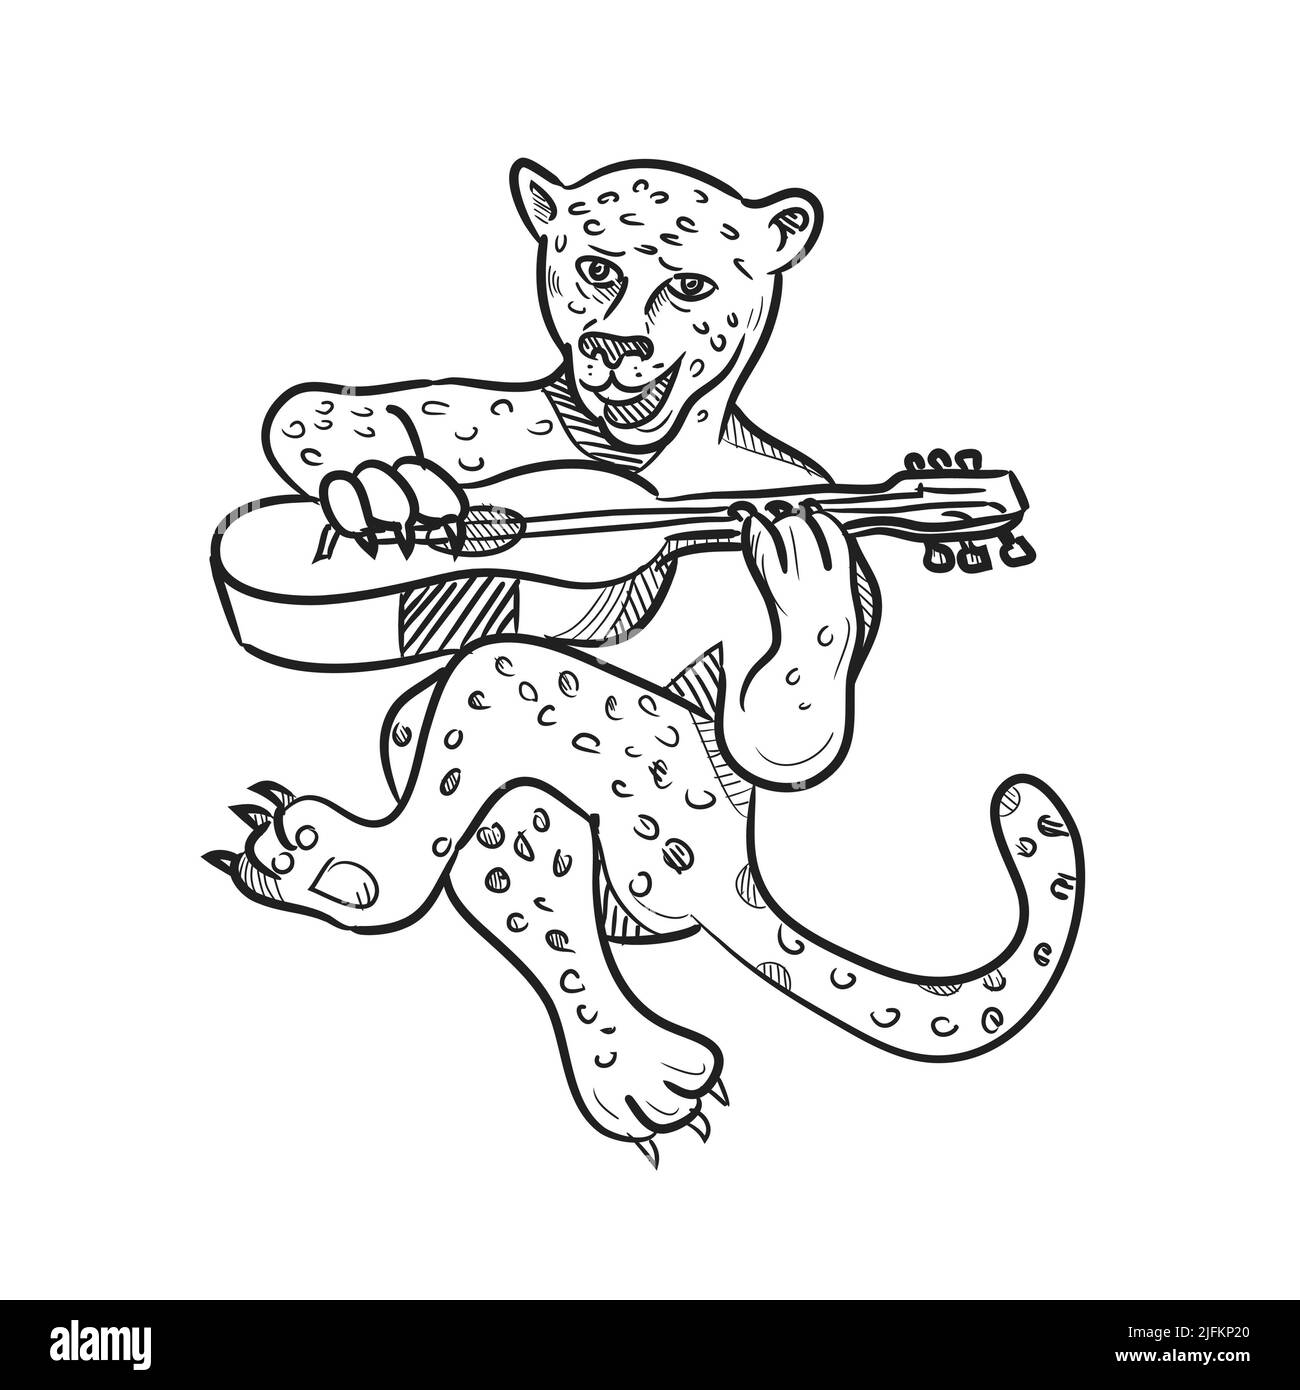 Cartoon style illustration of a happy leopard playing an acoustic guitar while sitting down done in black and white on isolated white background. Stock Photo